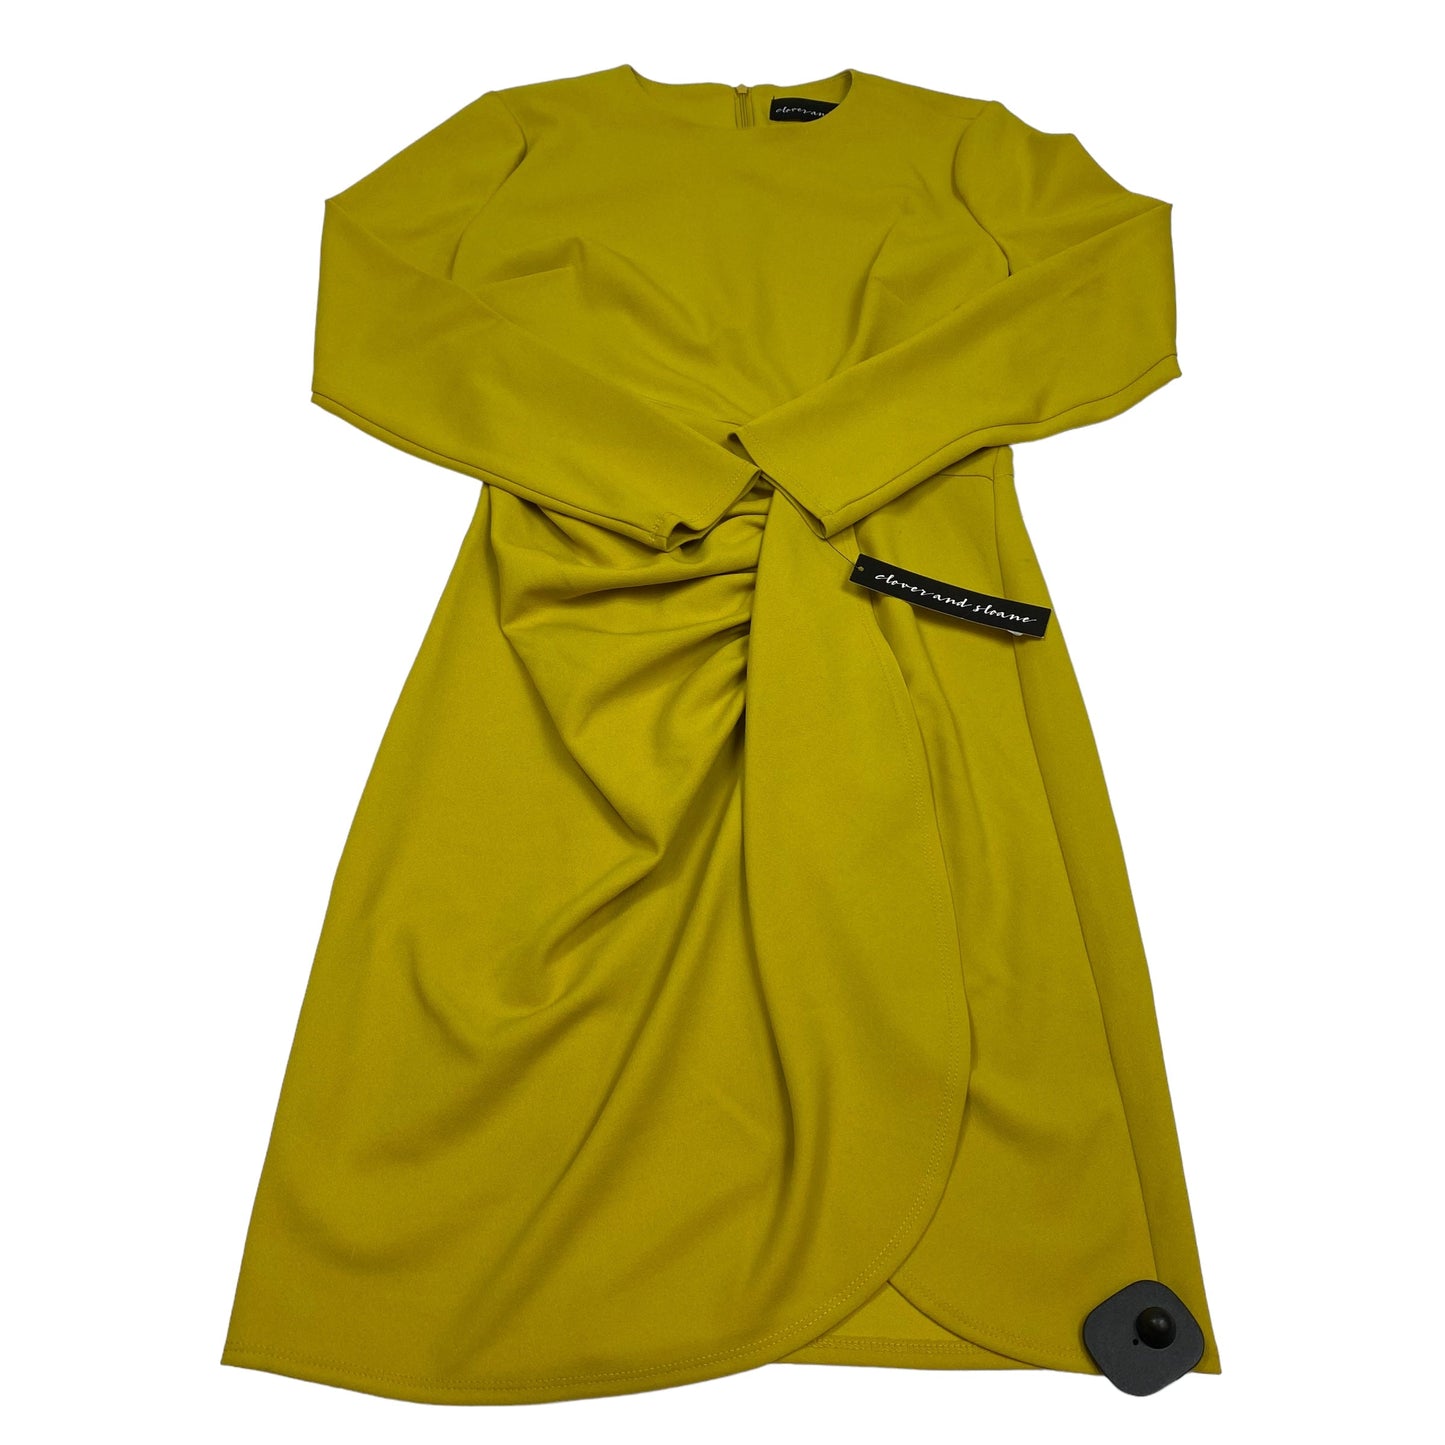 Yellow Dress Work Clothes Mentor, Size S